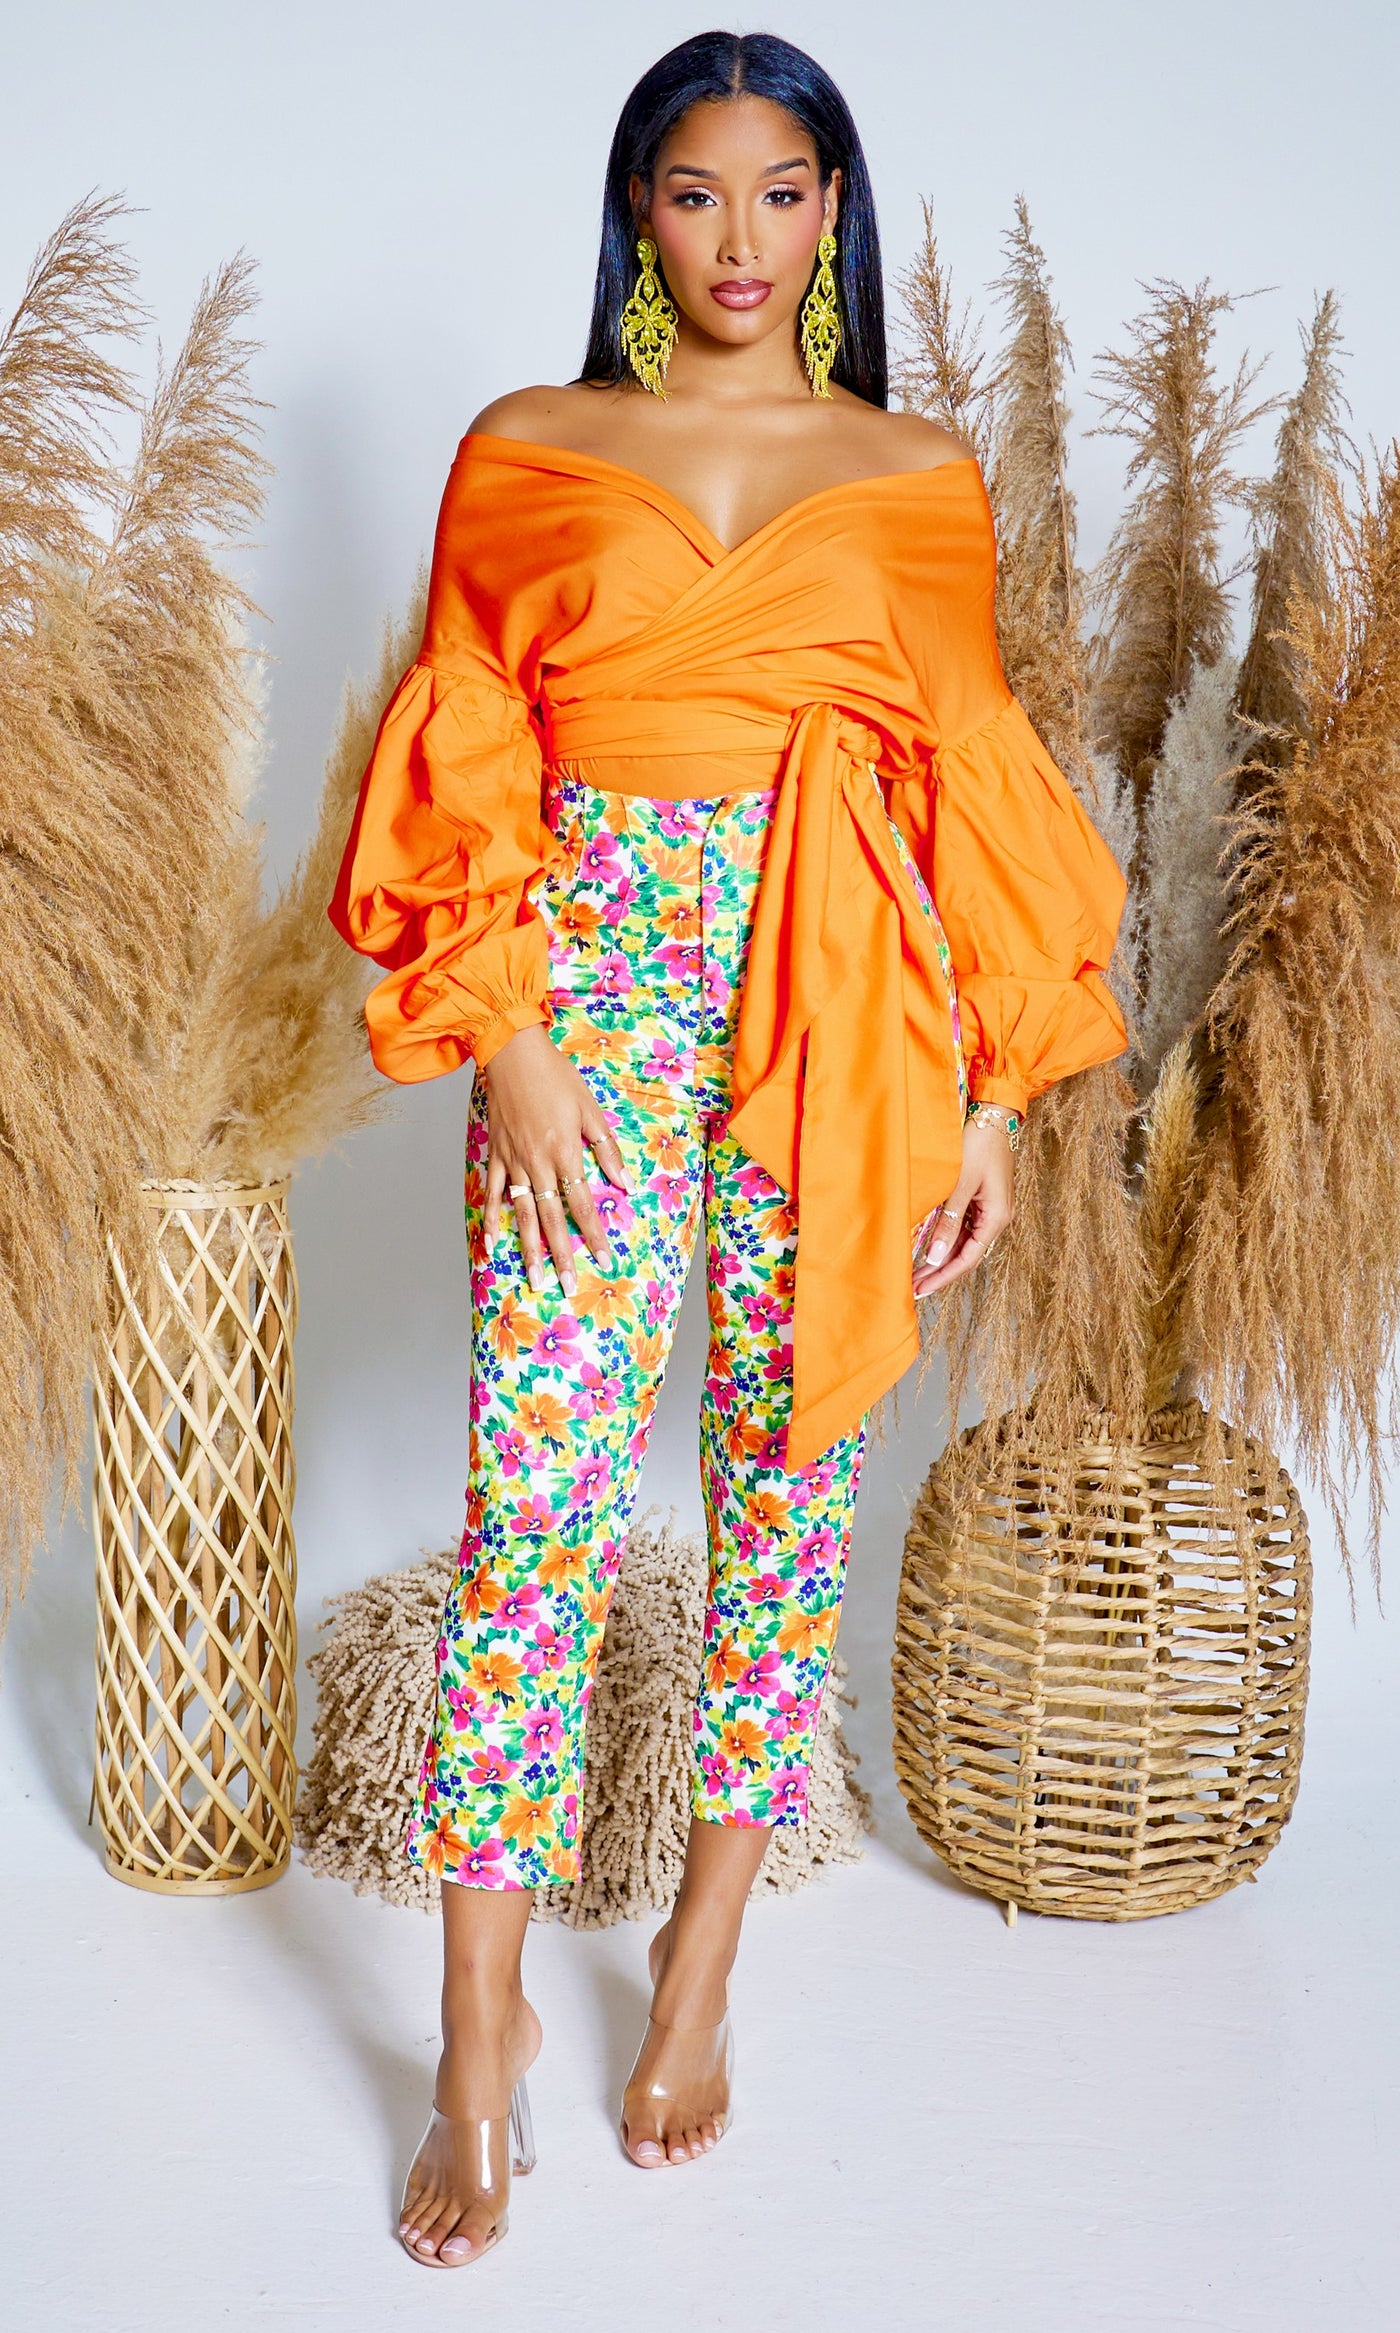 Blossom | Floral Print Pants - Orange Print - Cutely Covered